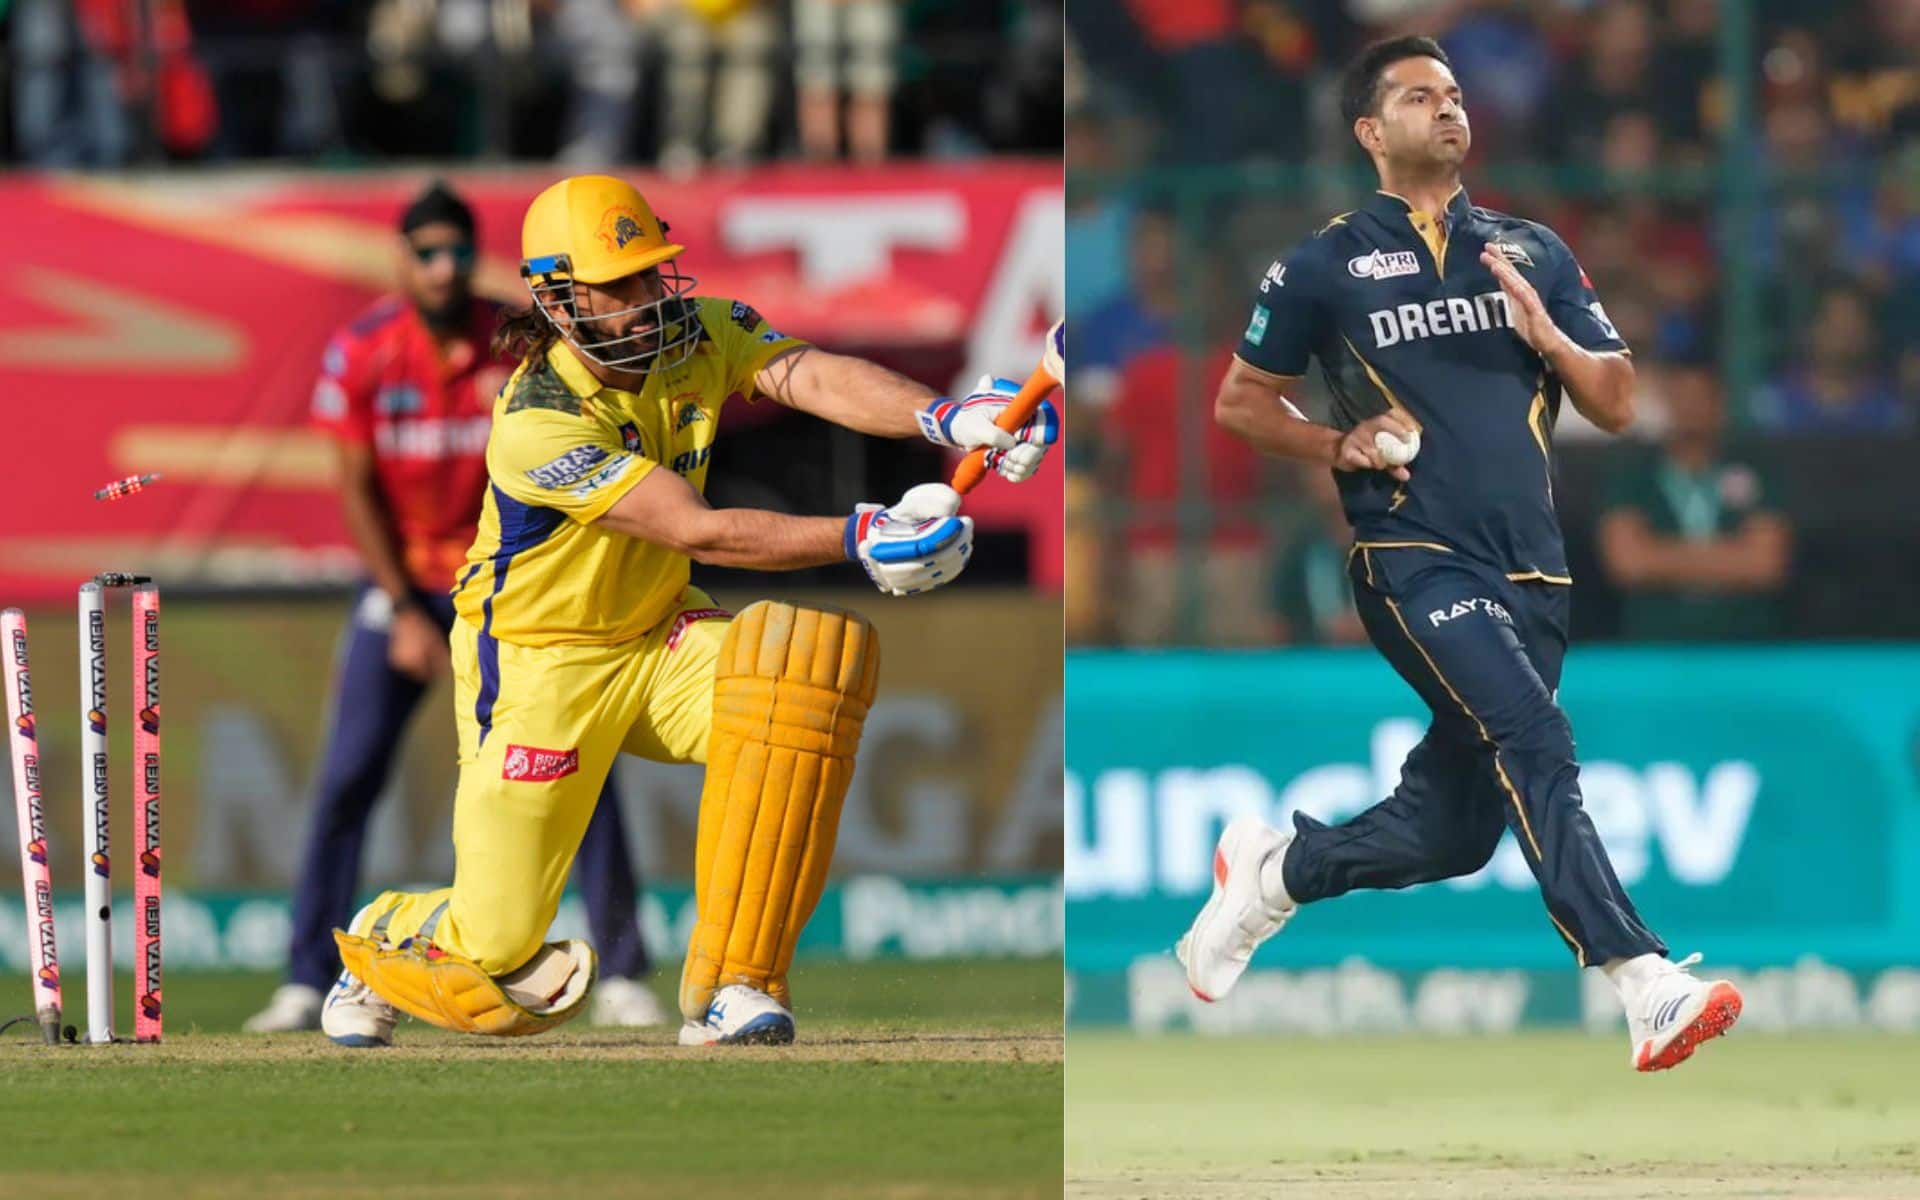 MS Dhoni vs Mohit Sharma will be an interesting face-off in the game [AP Photos/iplt20.com]